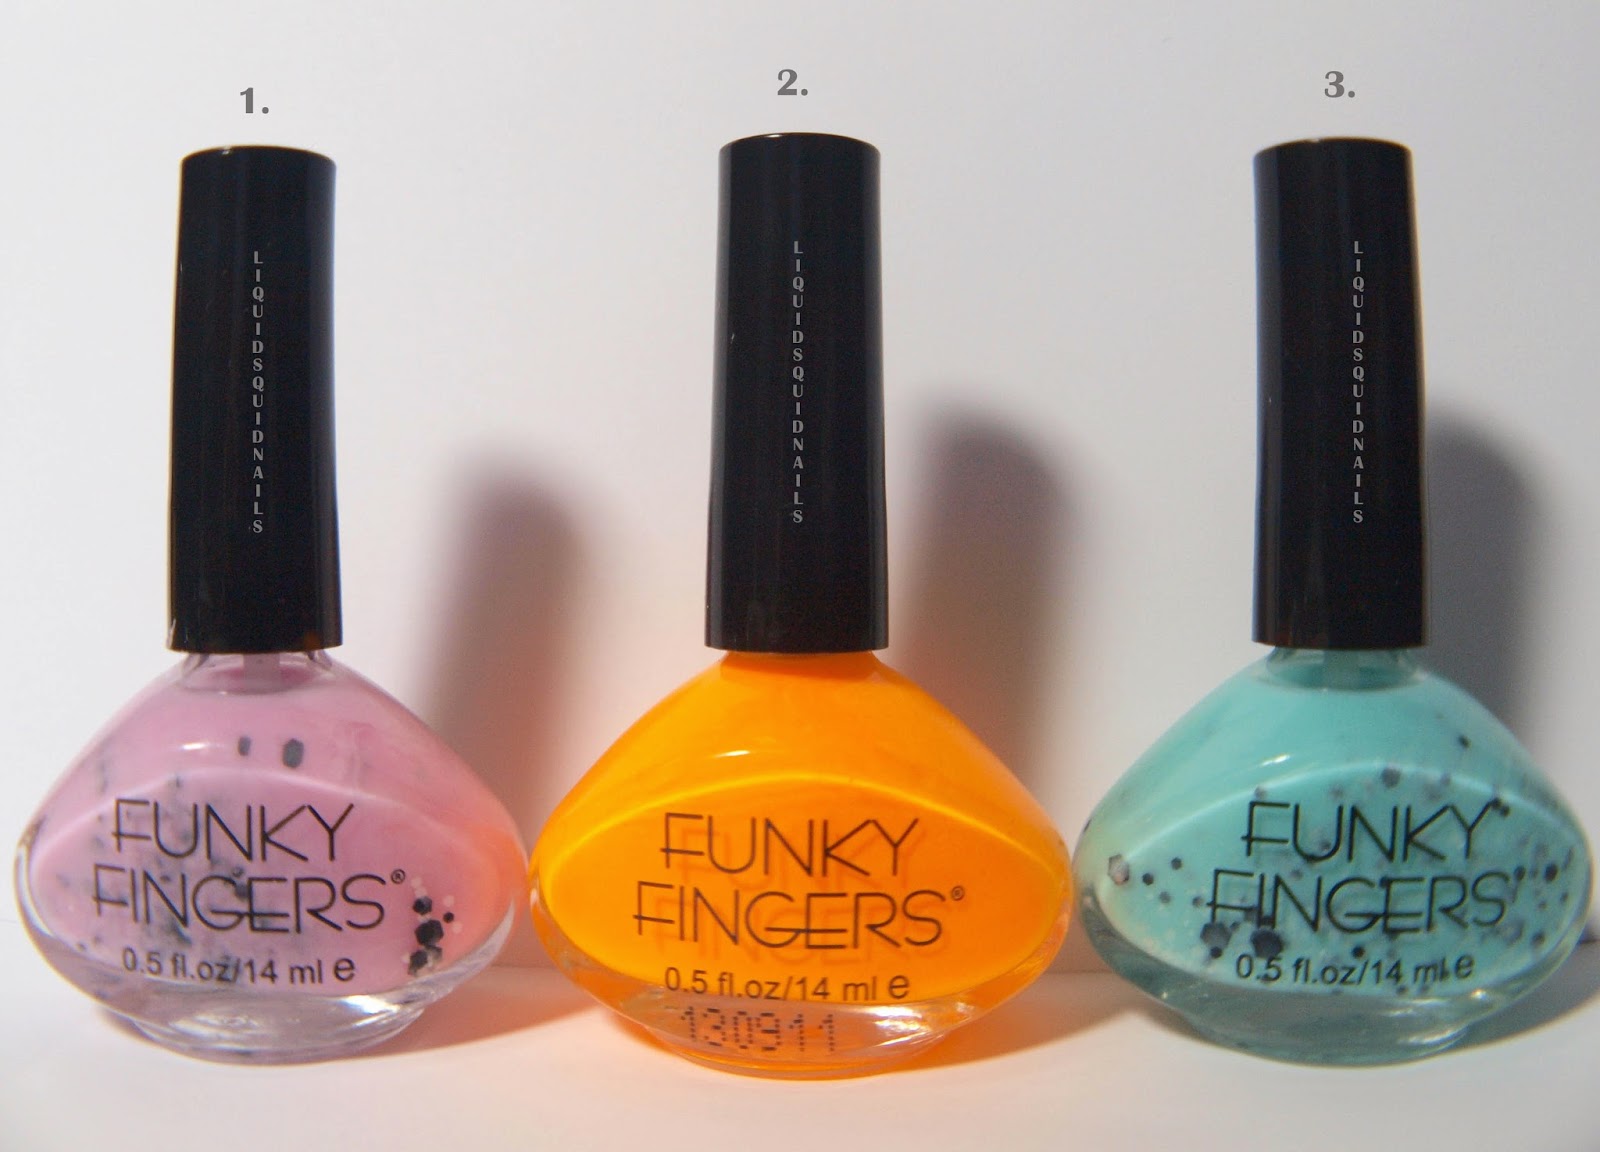 1. "Funky Fingers" Nail Art Game - wide 11